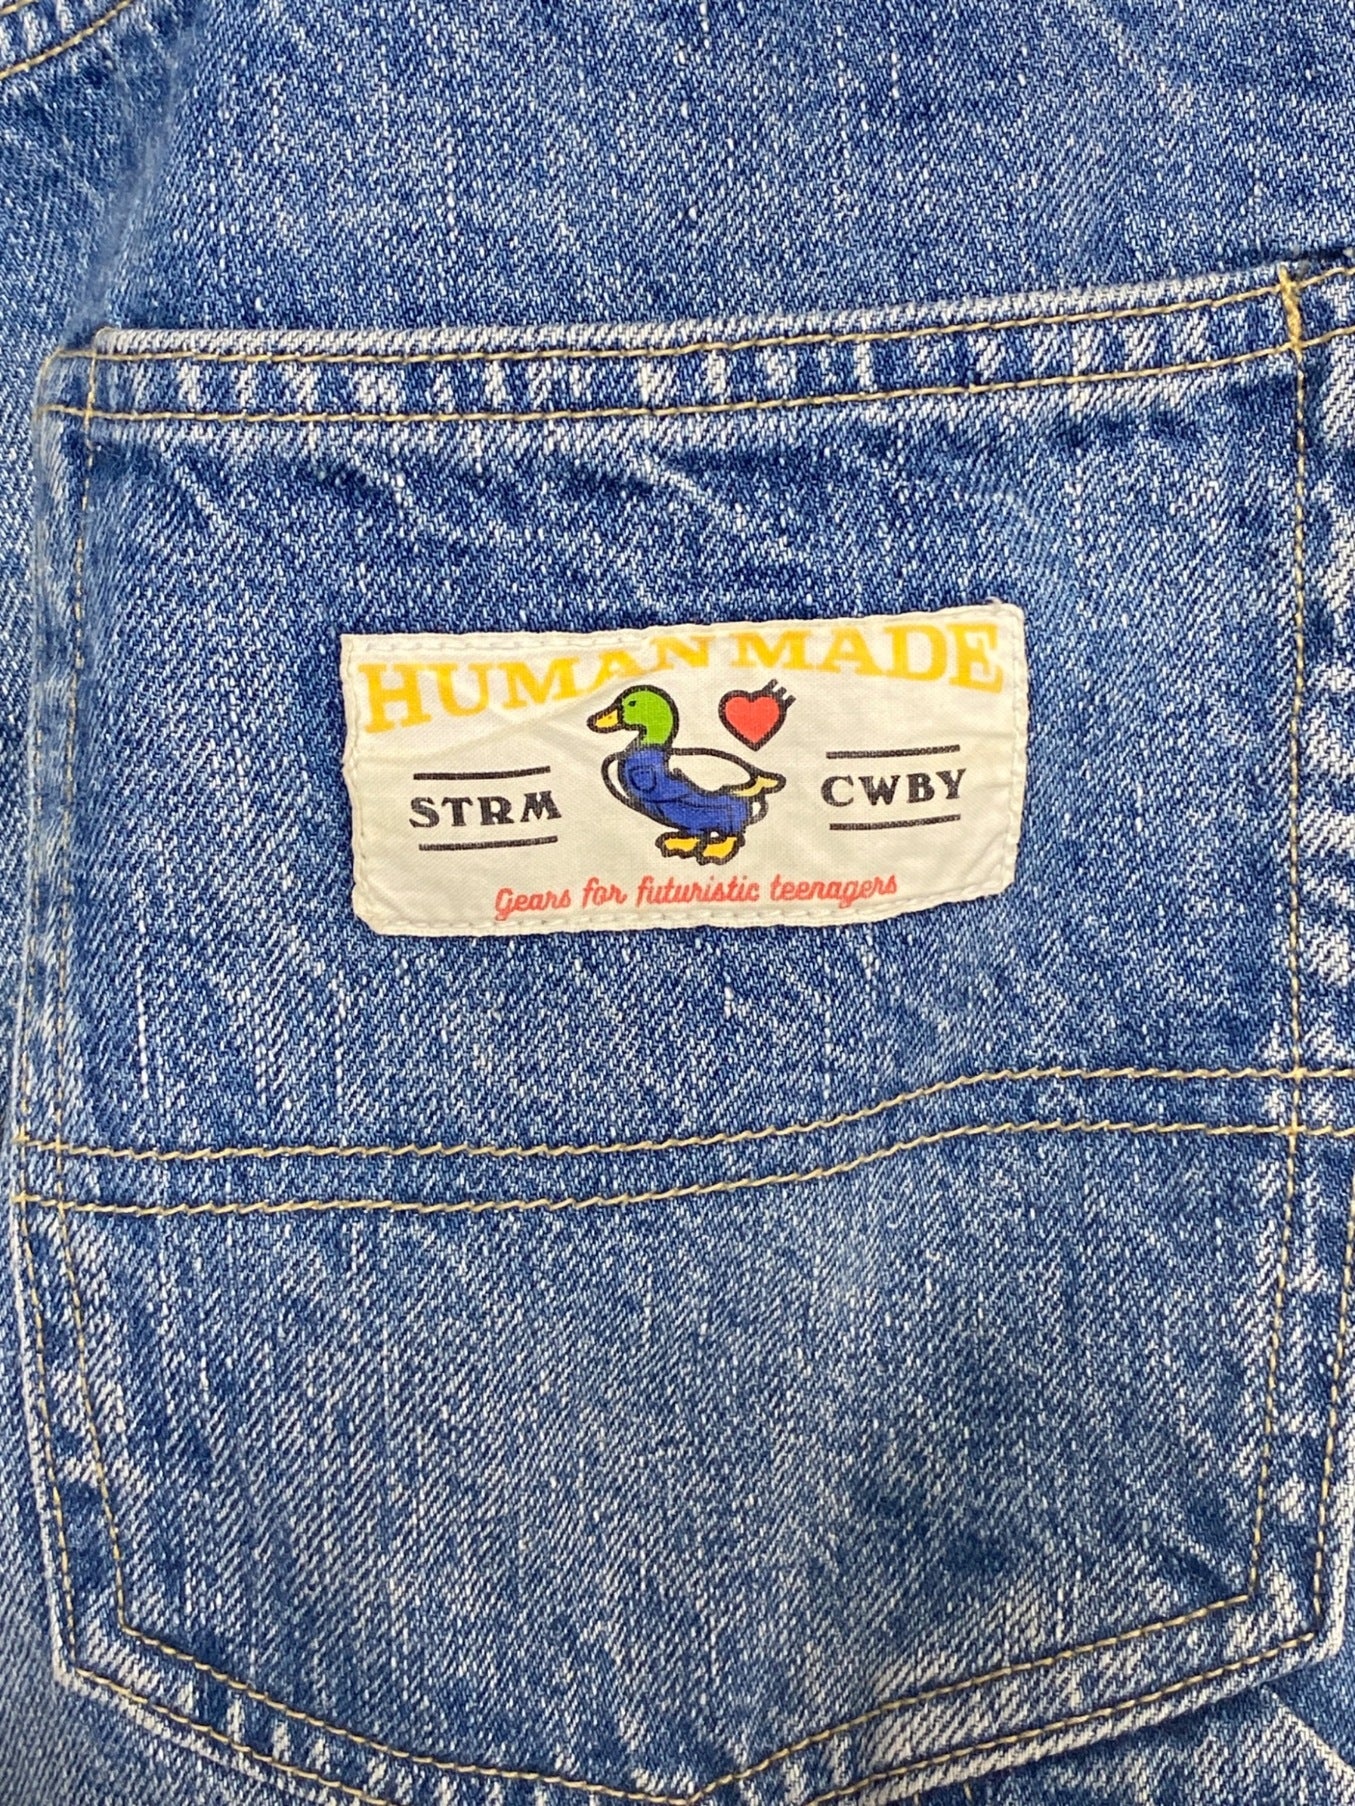 HUMAN MADE STORM COWBOY DENIM Collection Release